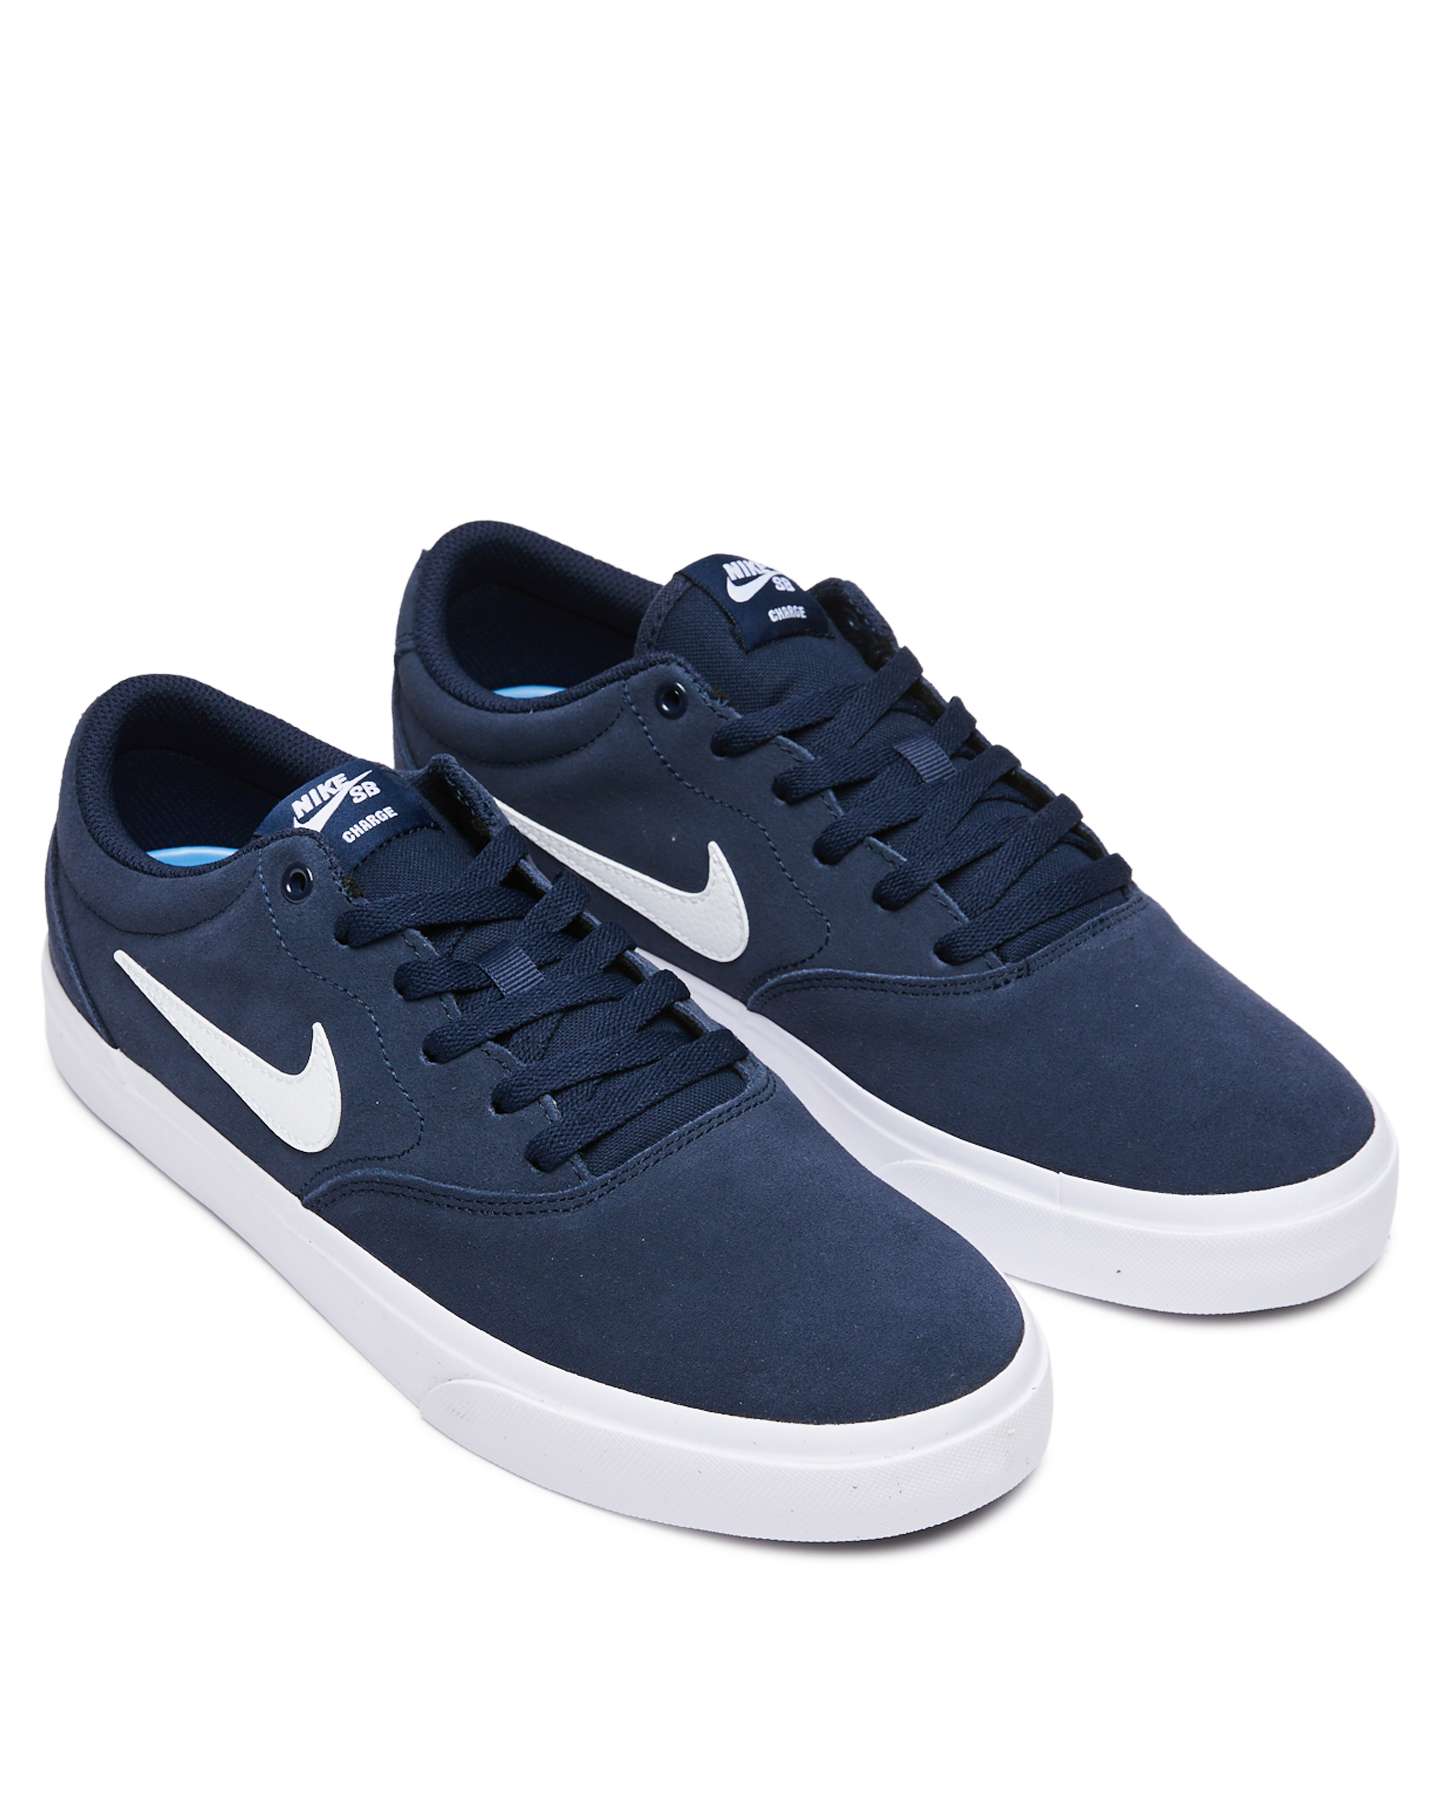 Nike Sb Charge Suede Shoe - Obsidian | SurfStitch